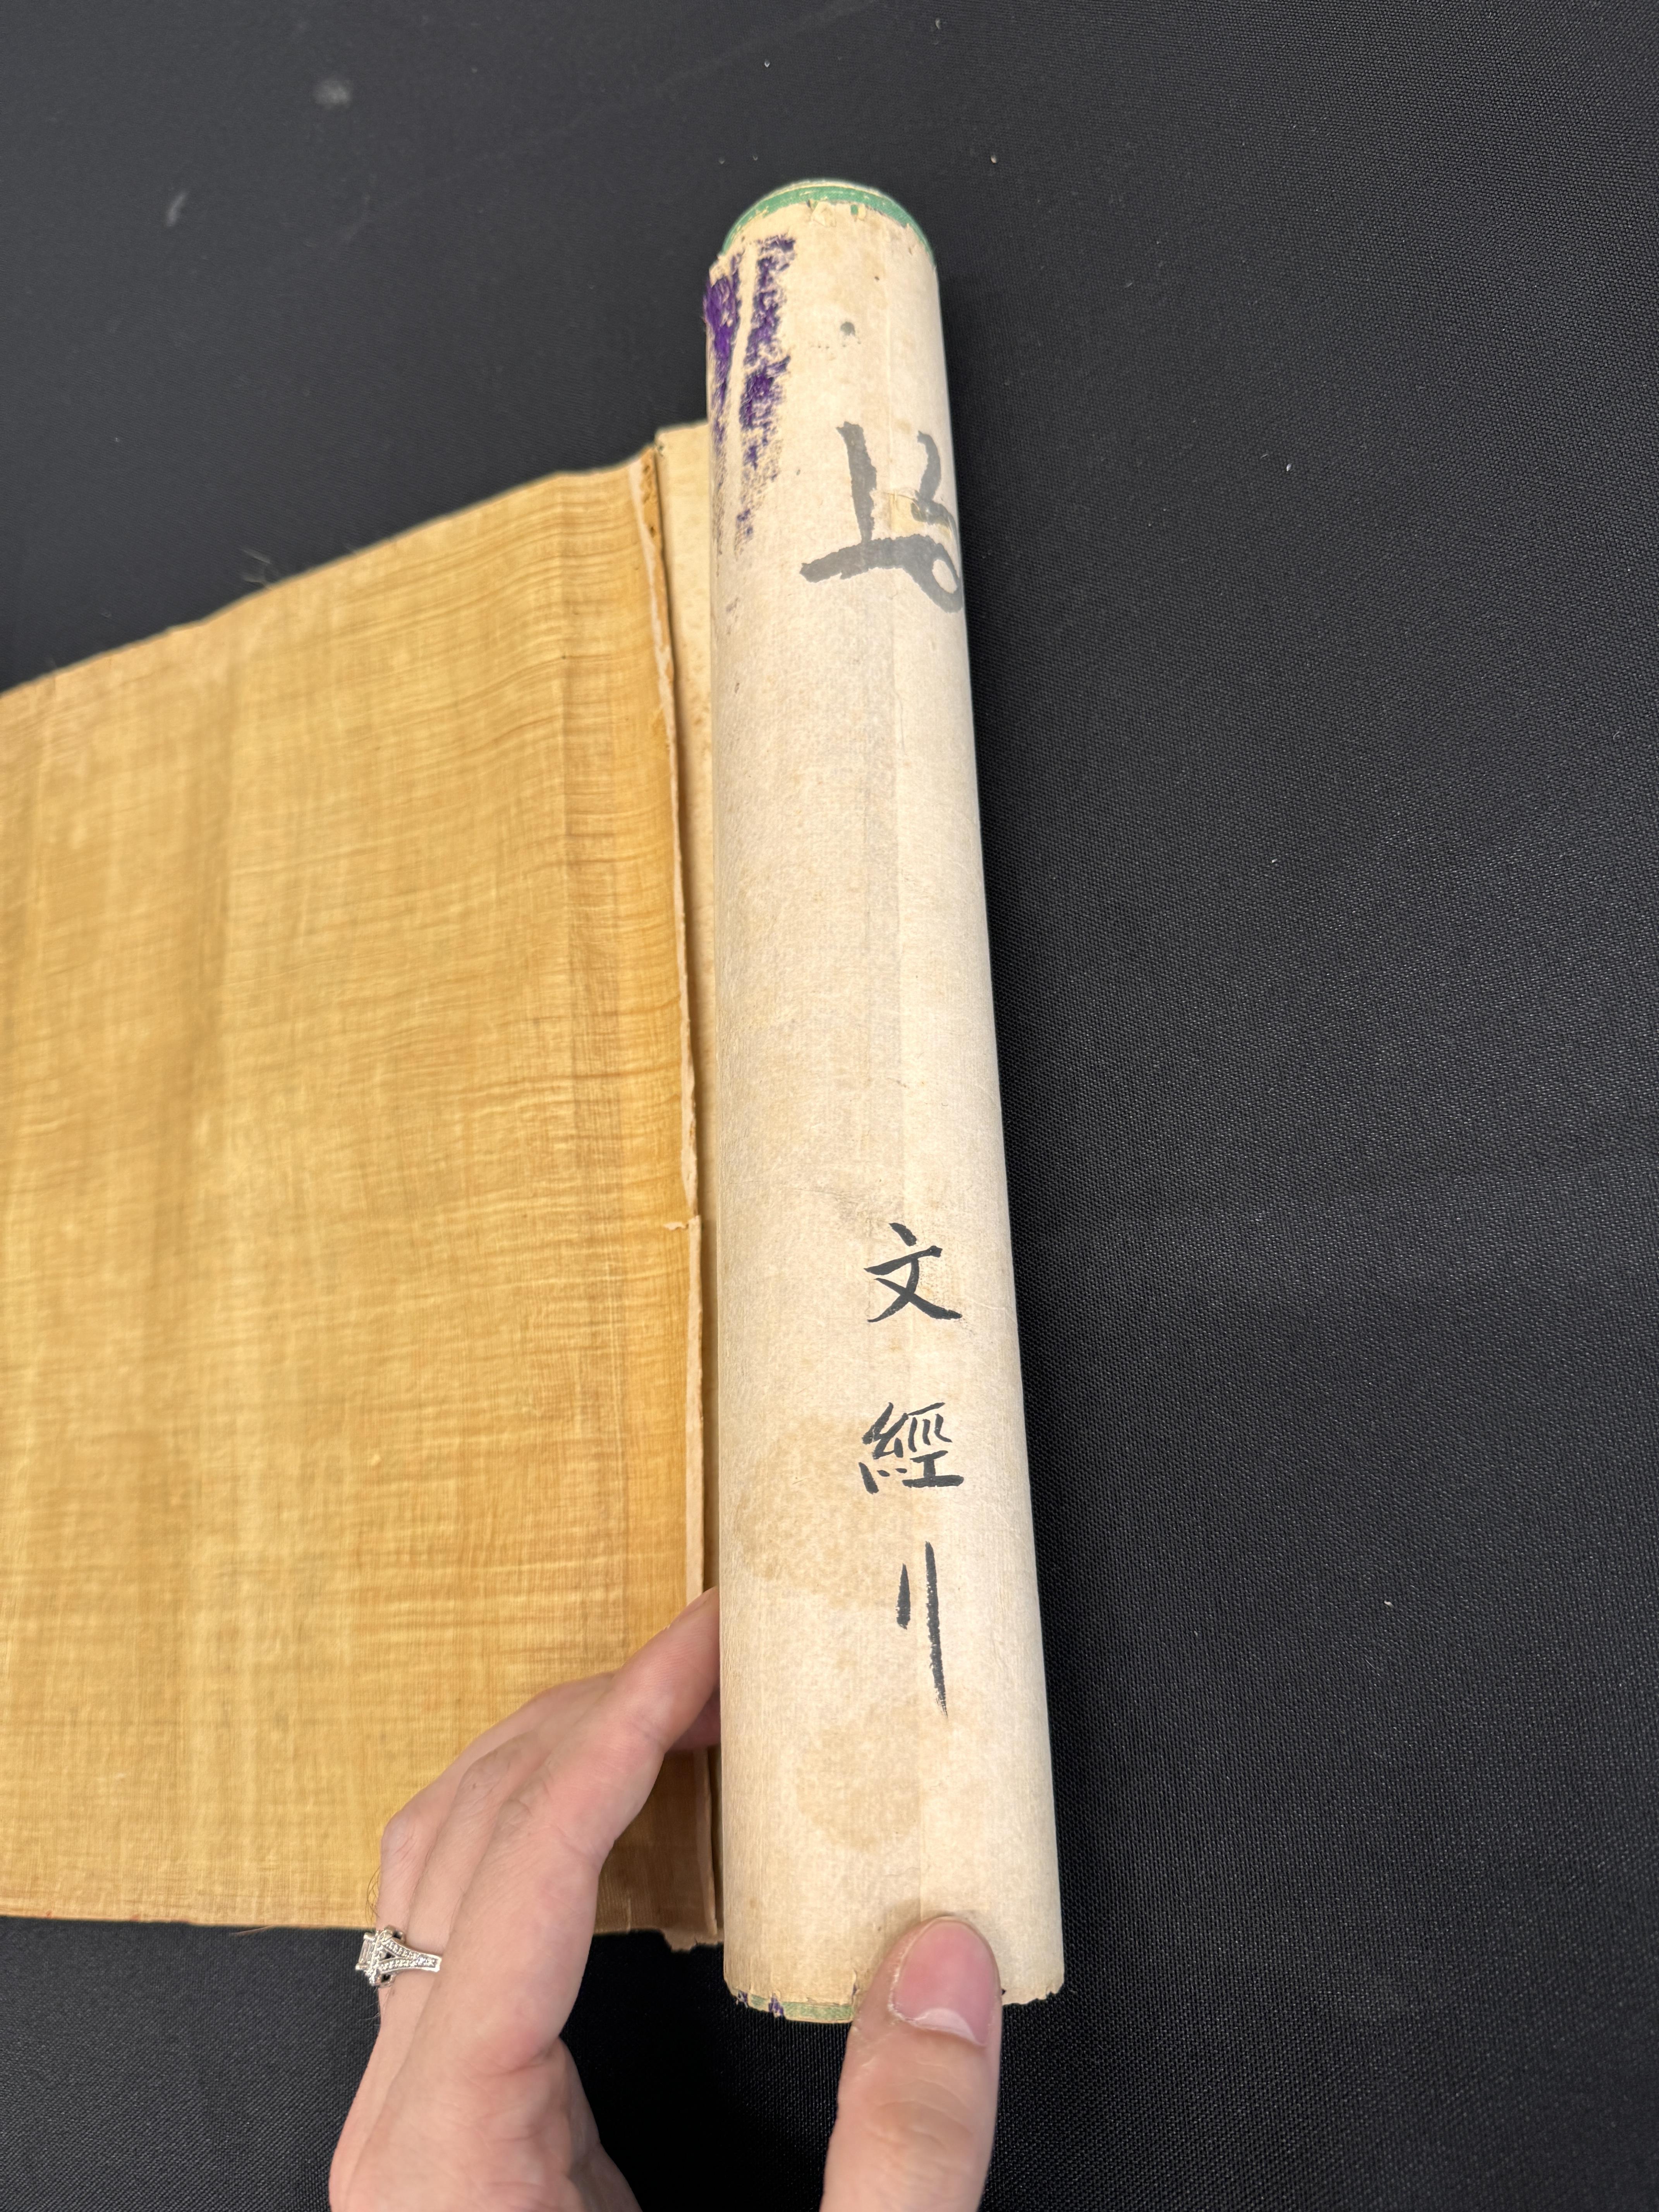 A CHINESE IMPERIAL EDICT HANDSCROLL 清光緒 1894年 世襲誥命文書 - Image 25 of 30